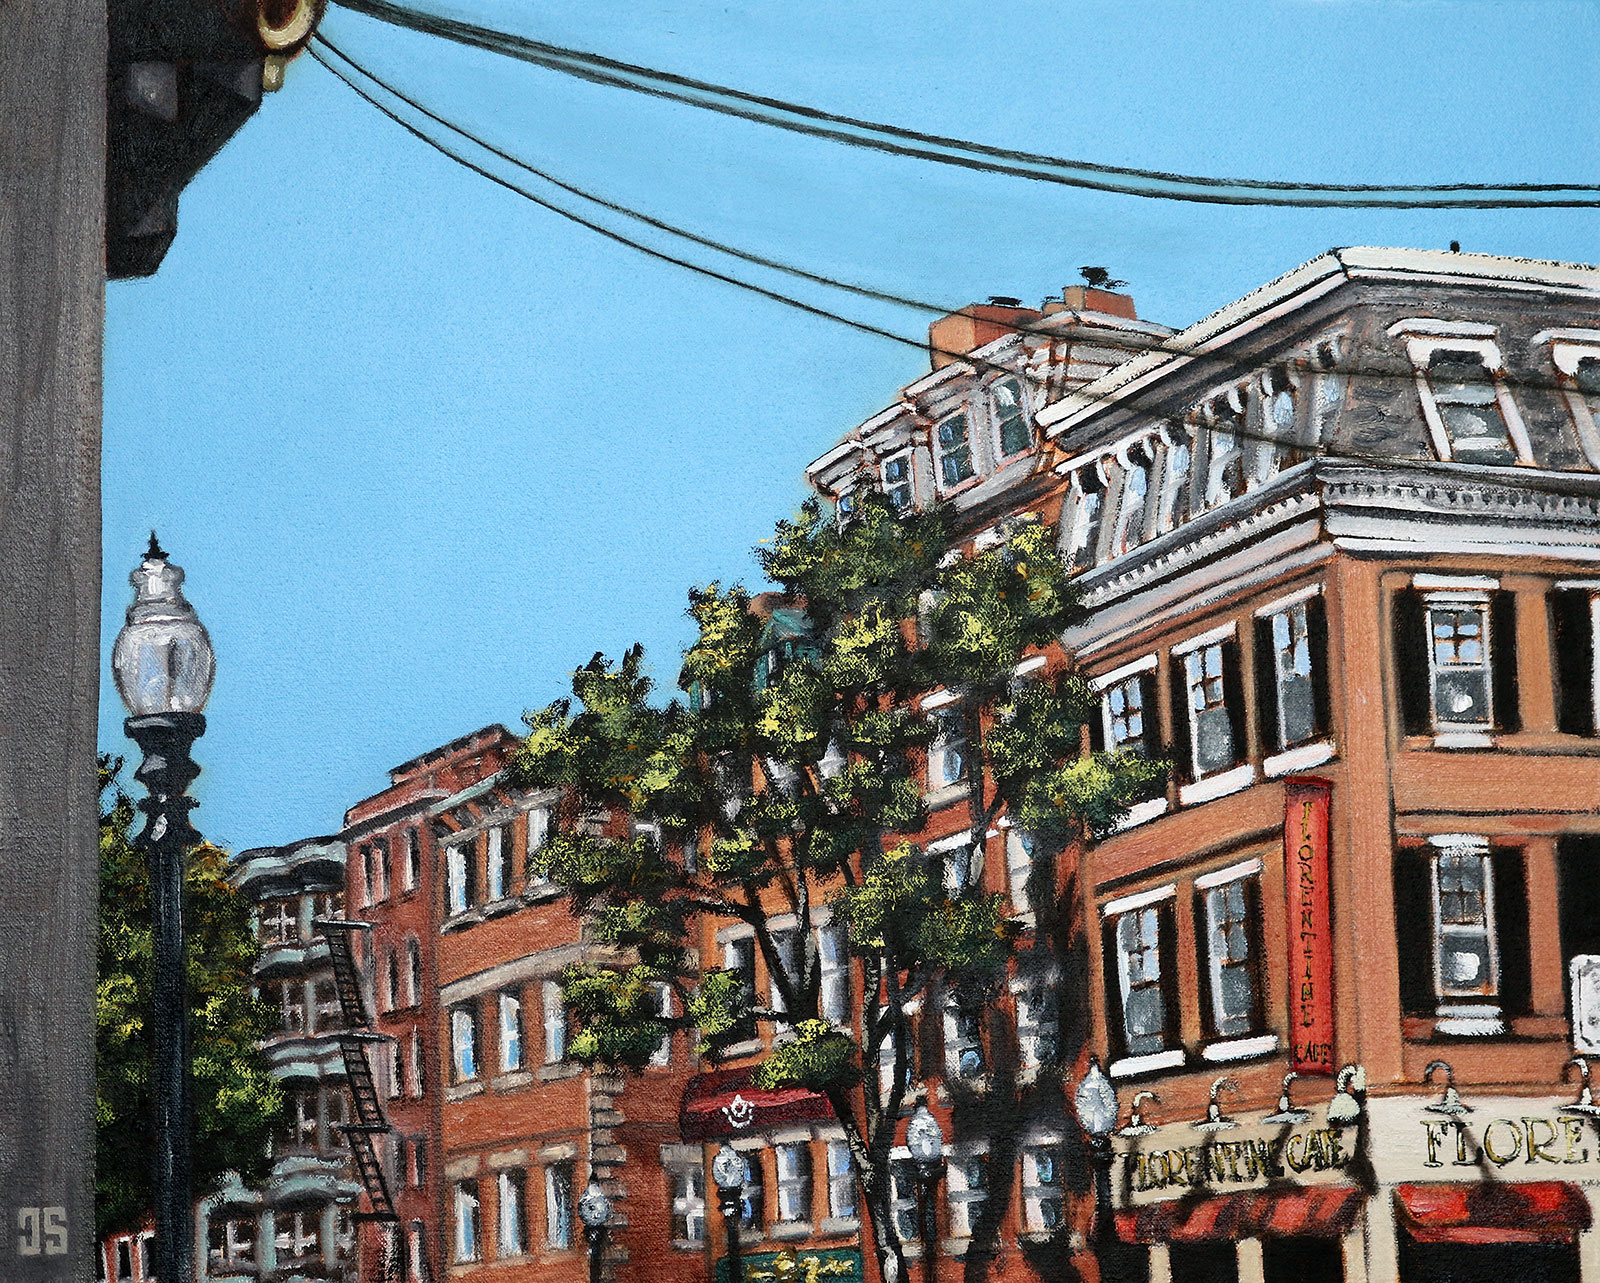 Oil painting "Little Italy, Boston" by Jeffrey Dale Starr